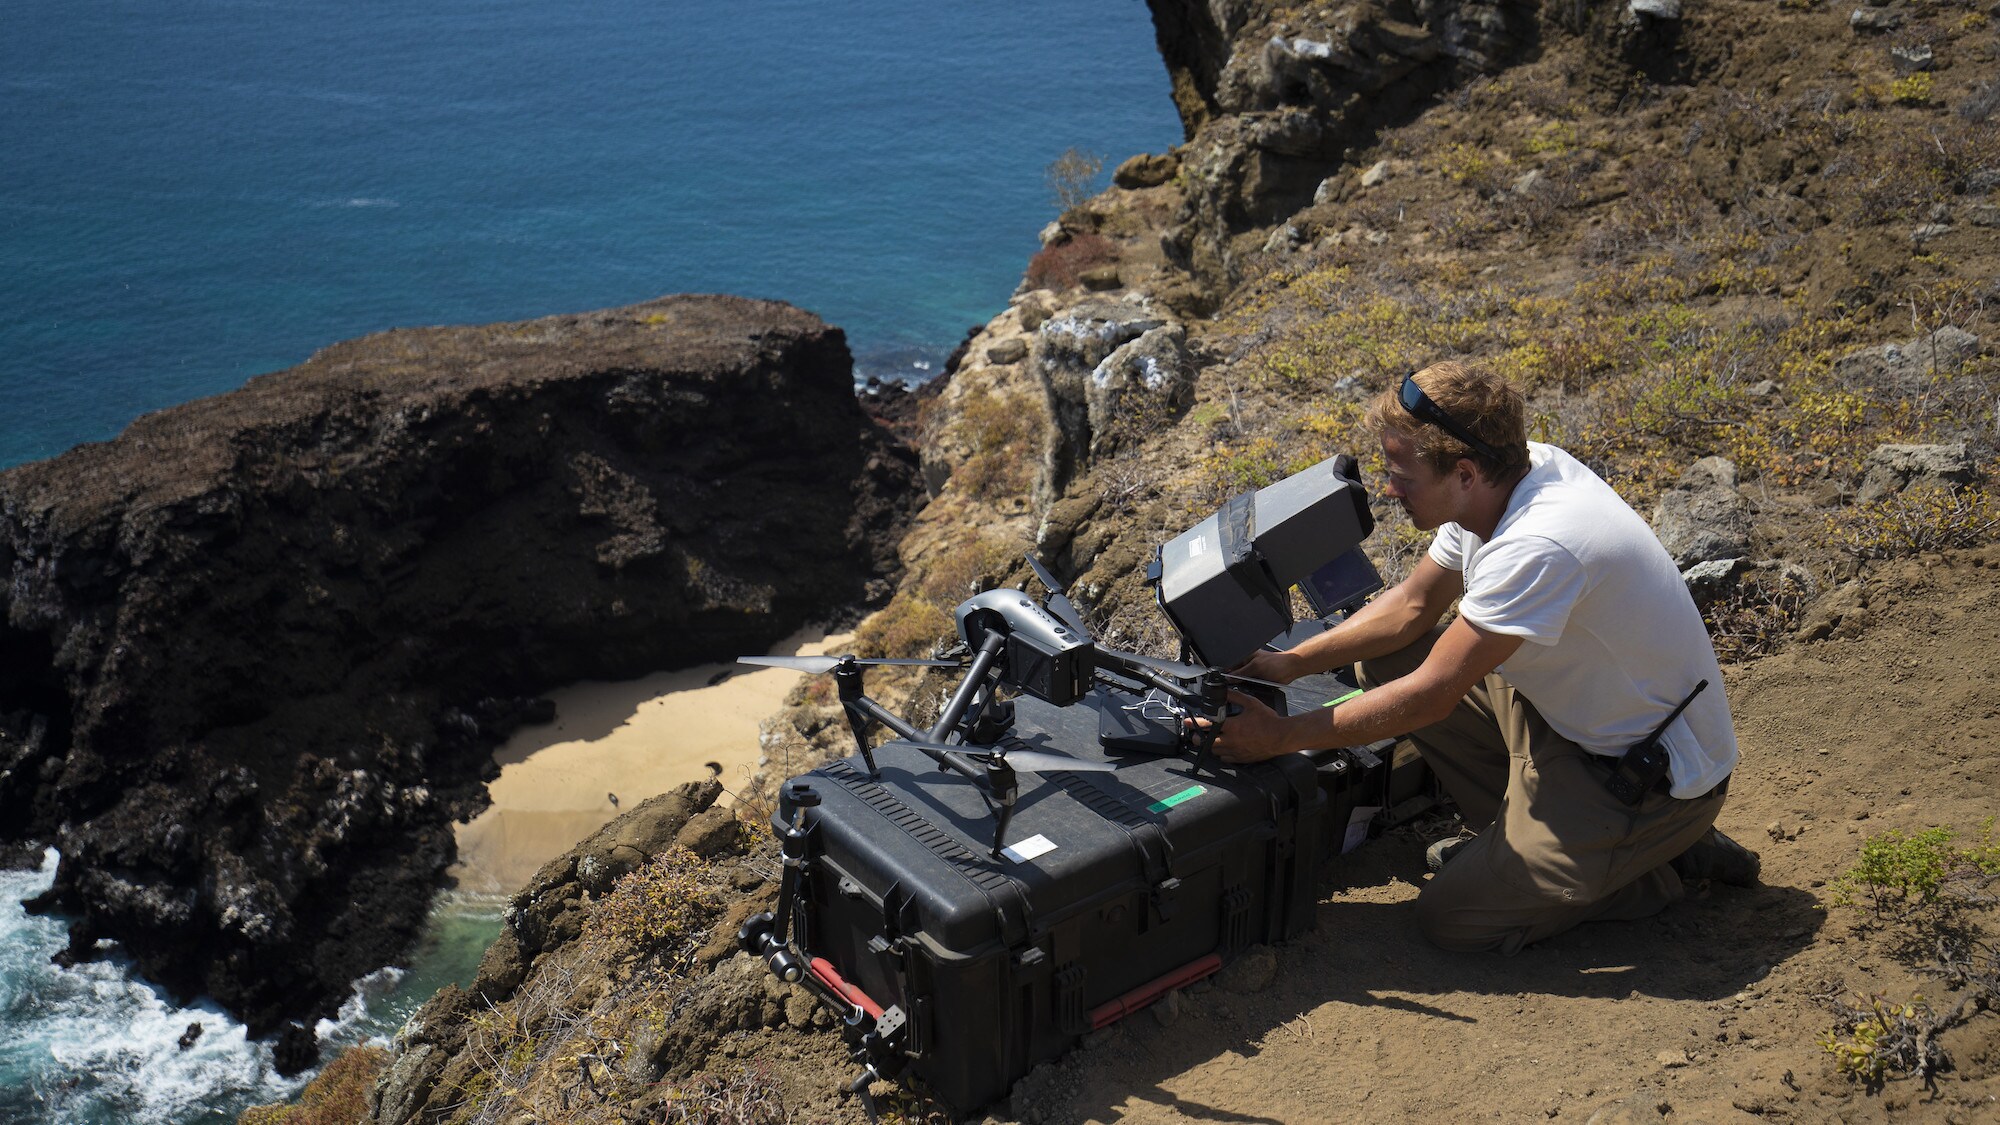 Bertie Gregory views drone footage on a monitor. (National Geographic for Disney+/Rakel Hansen)